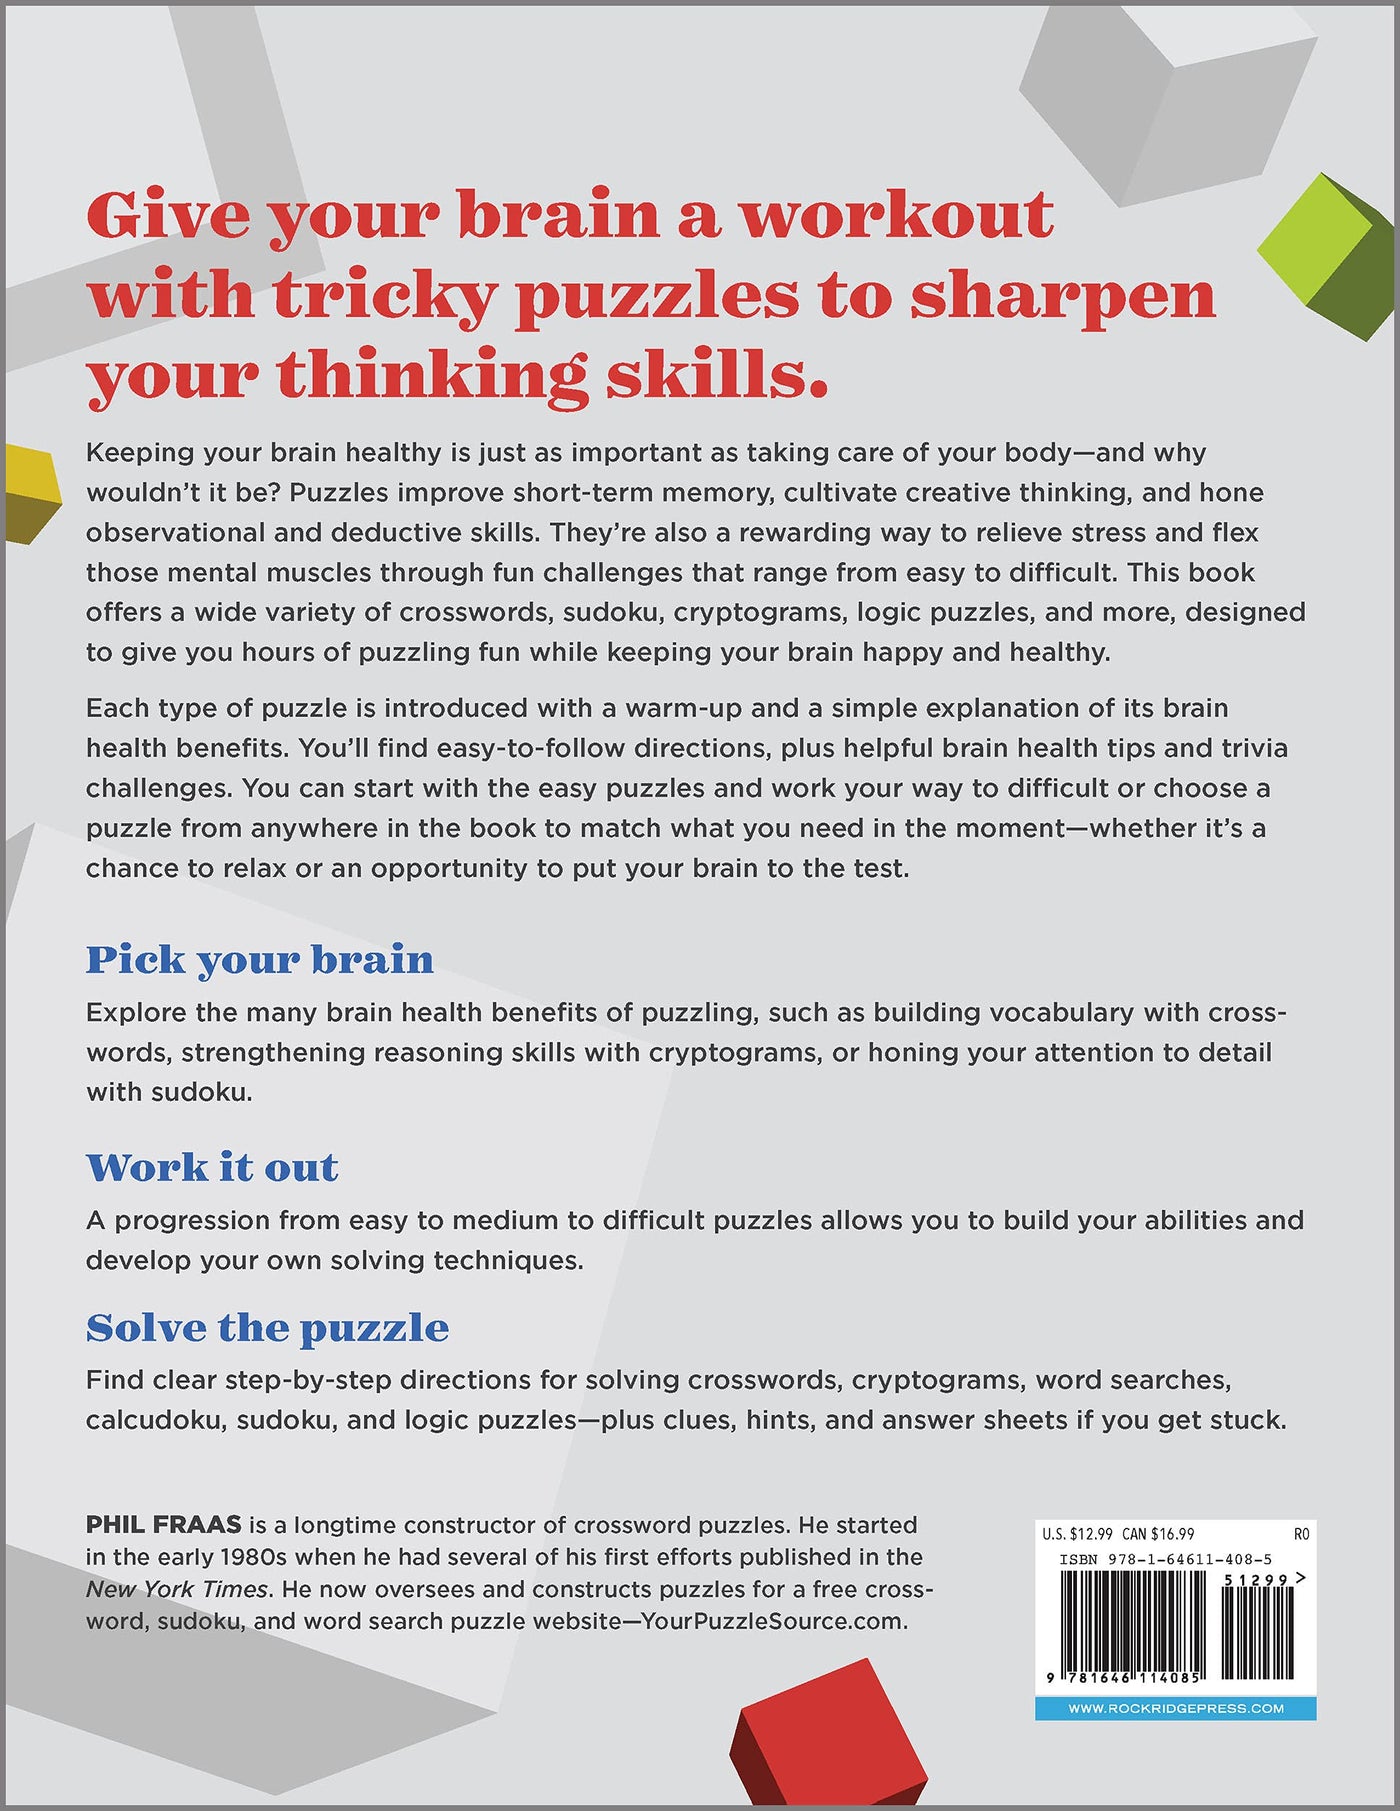 The Ultimate Brain Health Puzzle Book for Adults: Crosswords, Sudoku, Cryptograms, Word Searches, and More! (Spiral Bound)